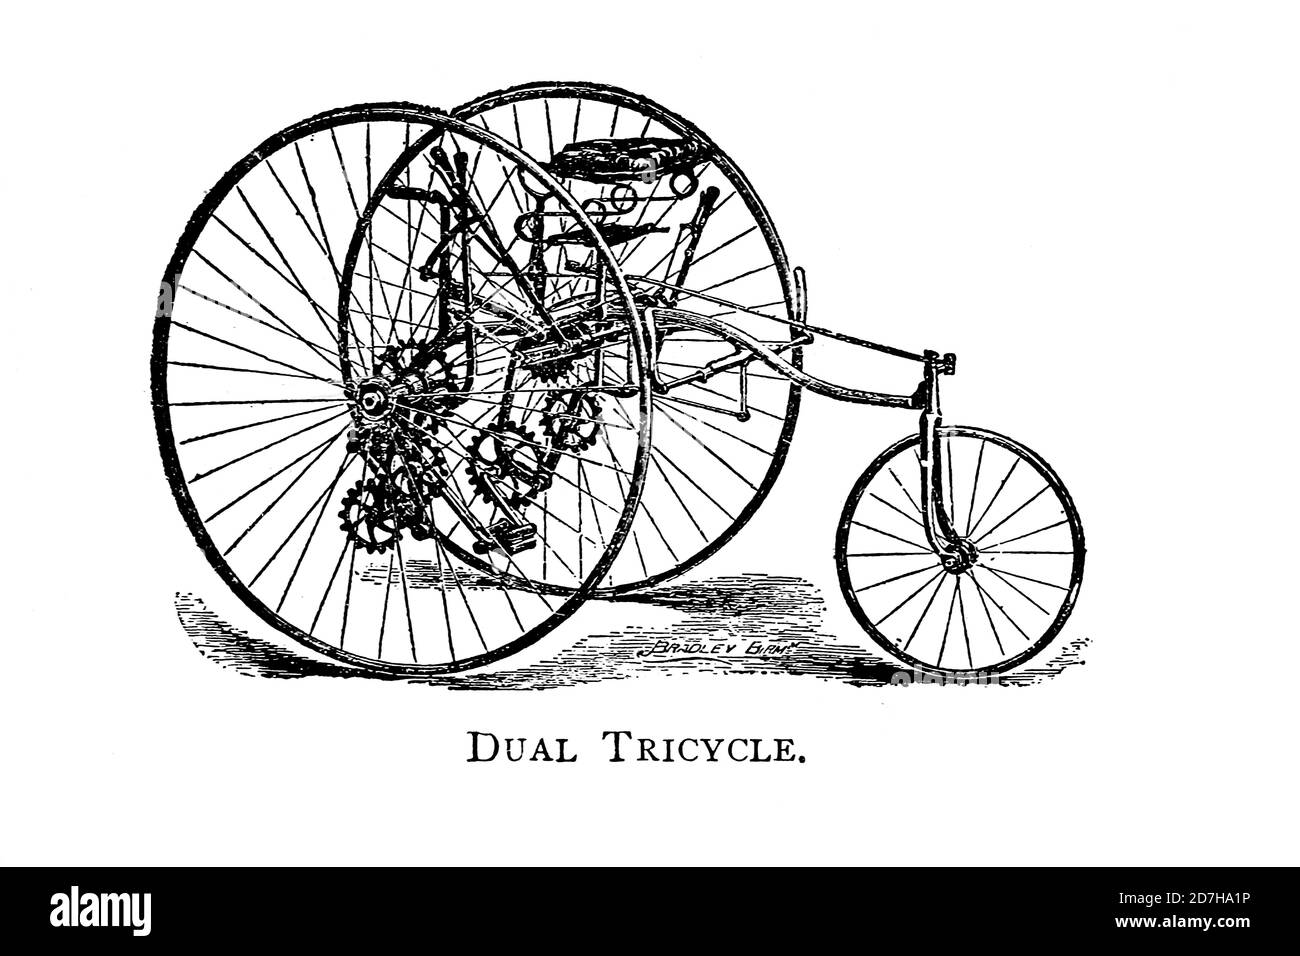 Dual Tricycle with two large front wheels From Wheels and Wheeling; An indispensable handbook for cyclists, with over two hundred illustrations by Por Stock Photo